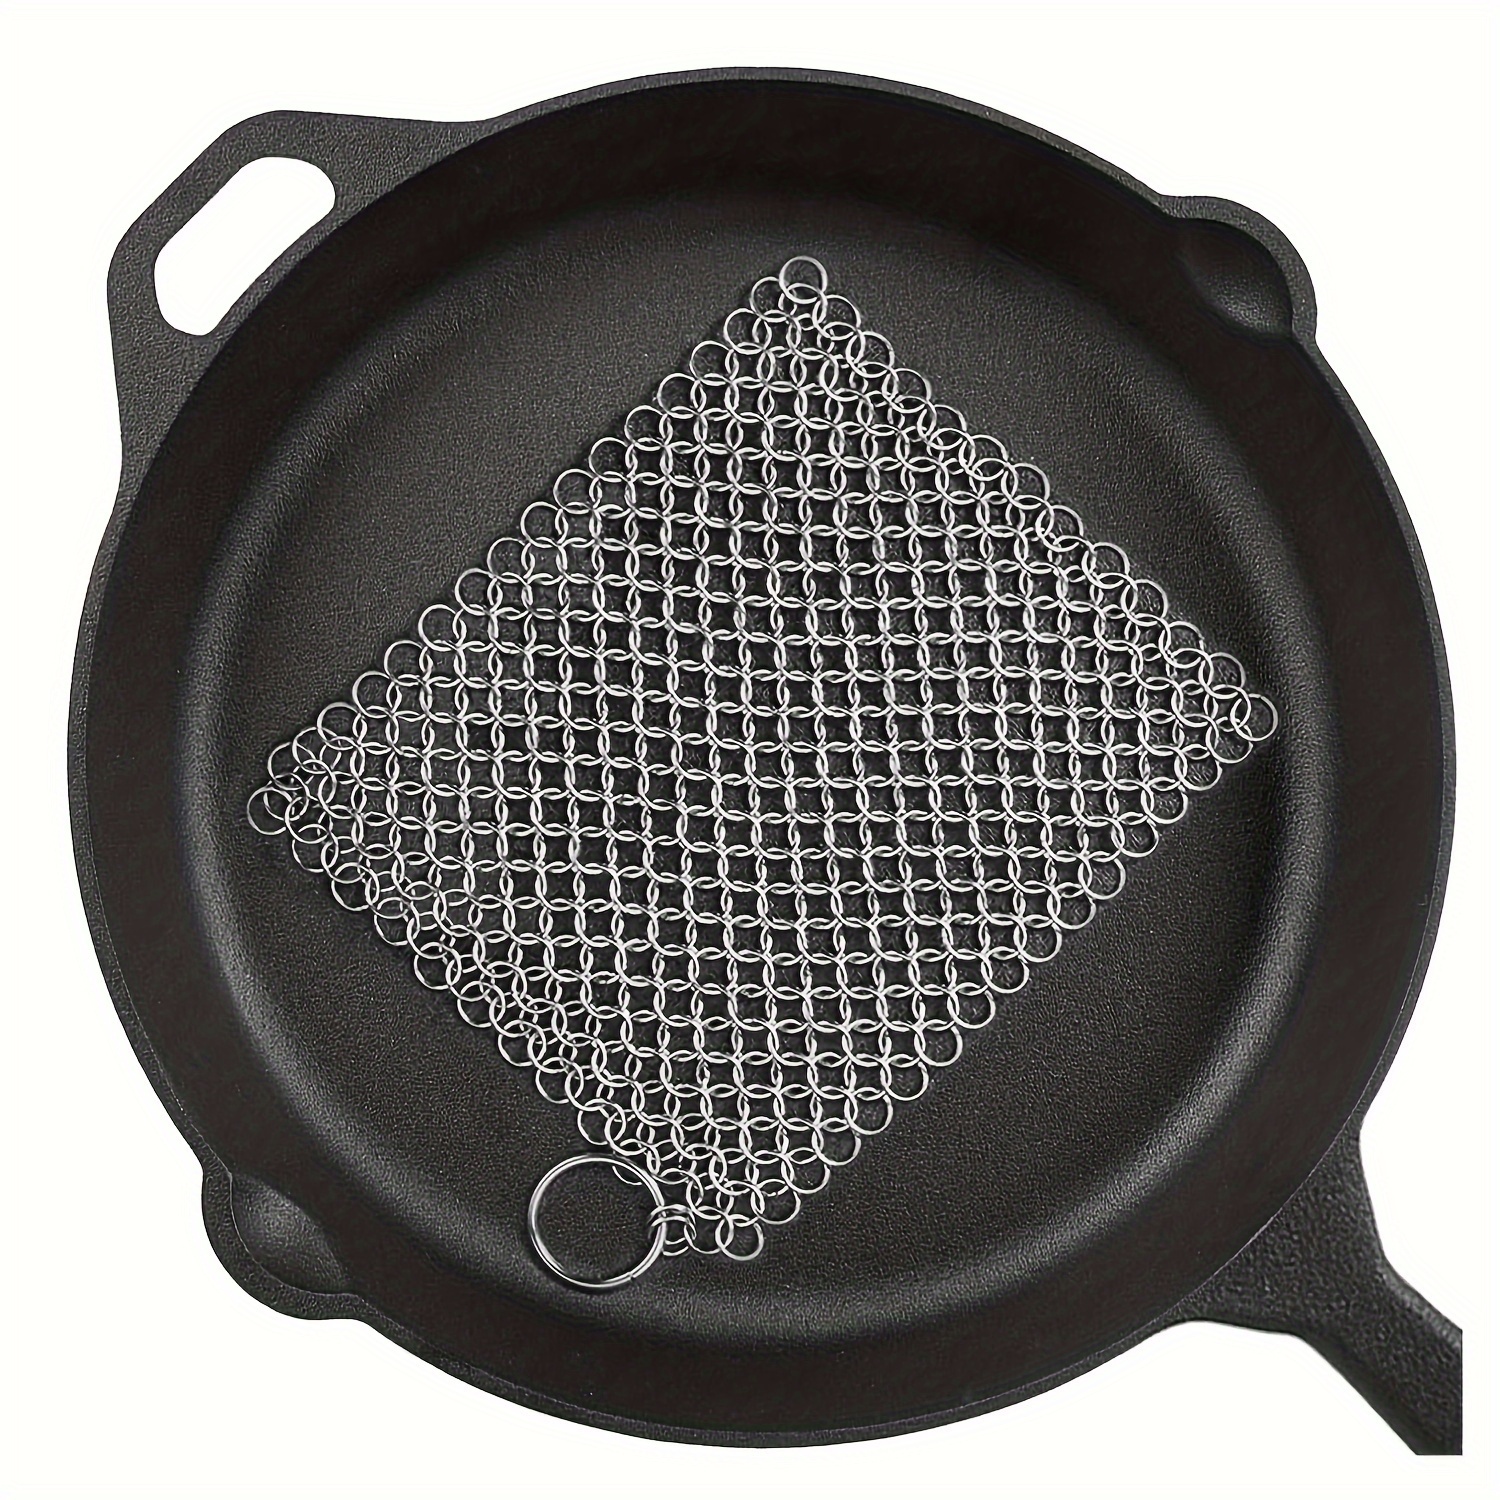 

1pc, Cast Iron Cleaner, Stainless Steel Pot Brush Net, Cast Iron Chainmail Scrubber, Metal Scrubber, Premium Cleaning Tool For Cleaning Pots, Woks, Pans, Bbq Grill, Cleaning Supplies, Cleaning Tool